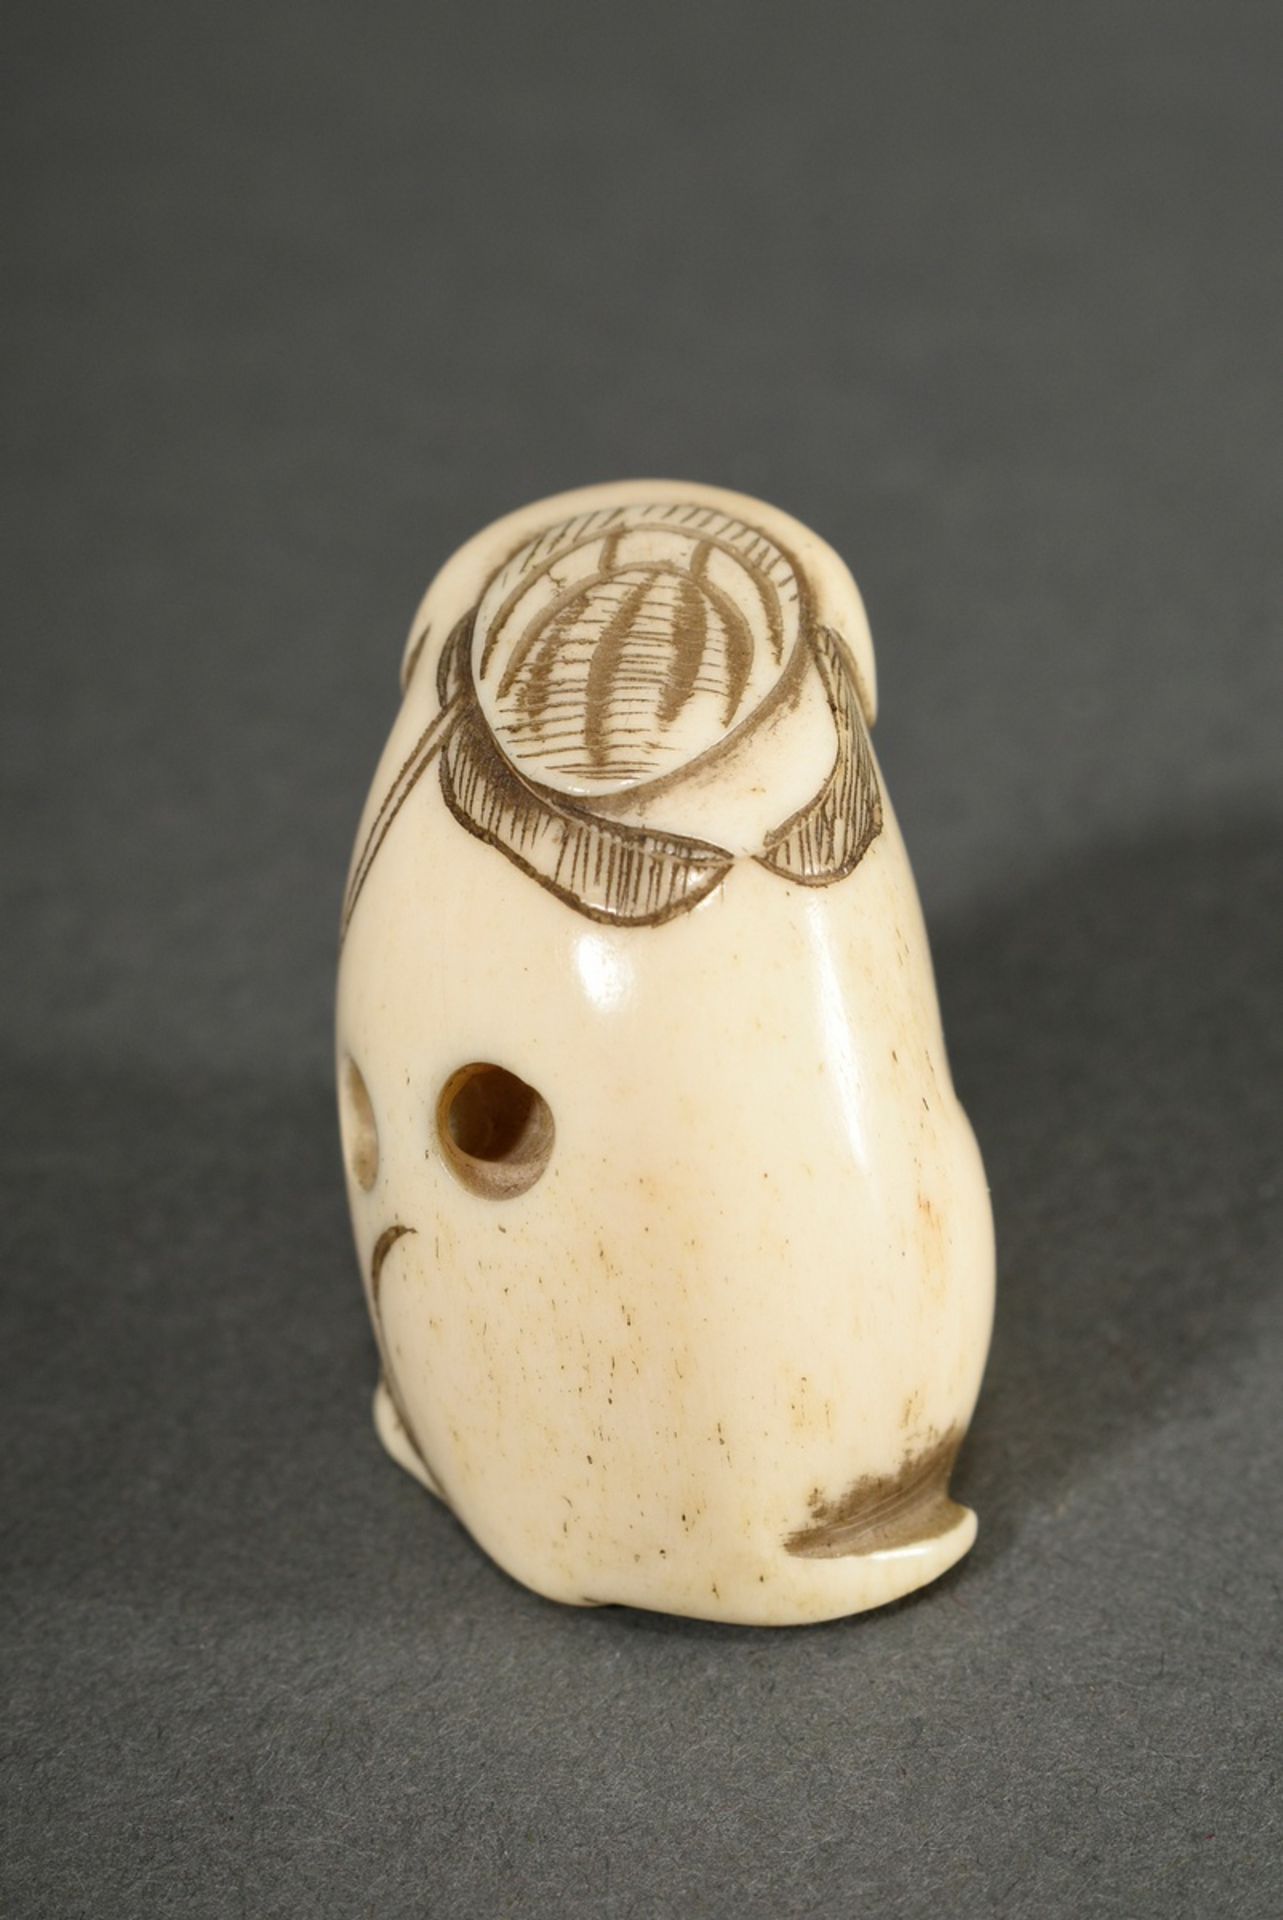 Stag horn netsuke "Sitting puppy" with inlaid horn eyes, Japan, h. 3.1cm - Image 4 of 5